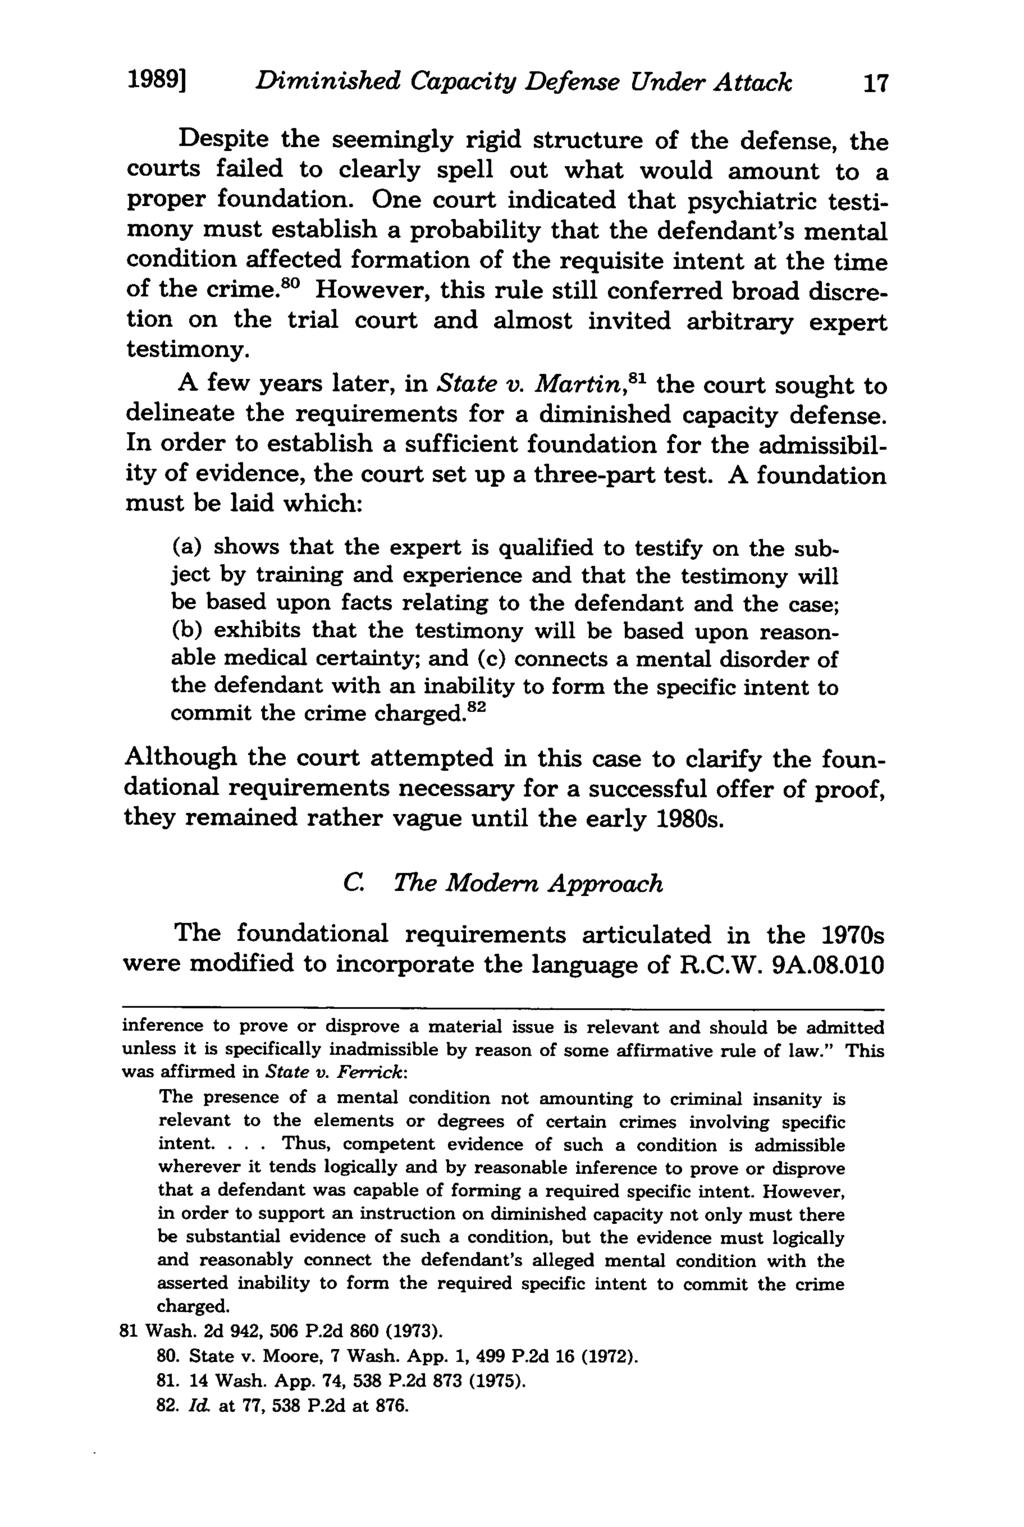 1989] Diminished Capacity Defense Under Attack Despite the seemingly rigid structure of the defense, the courts failed to clearly spell out what would amount to a proper foundation.